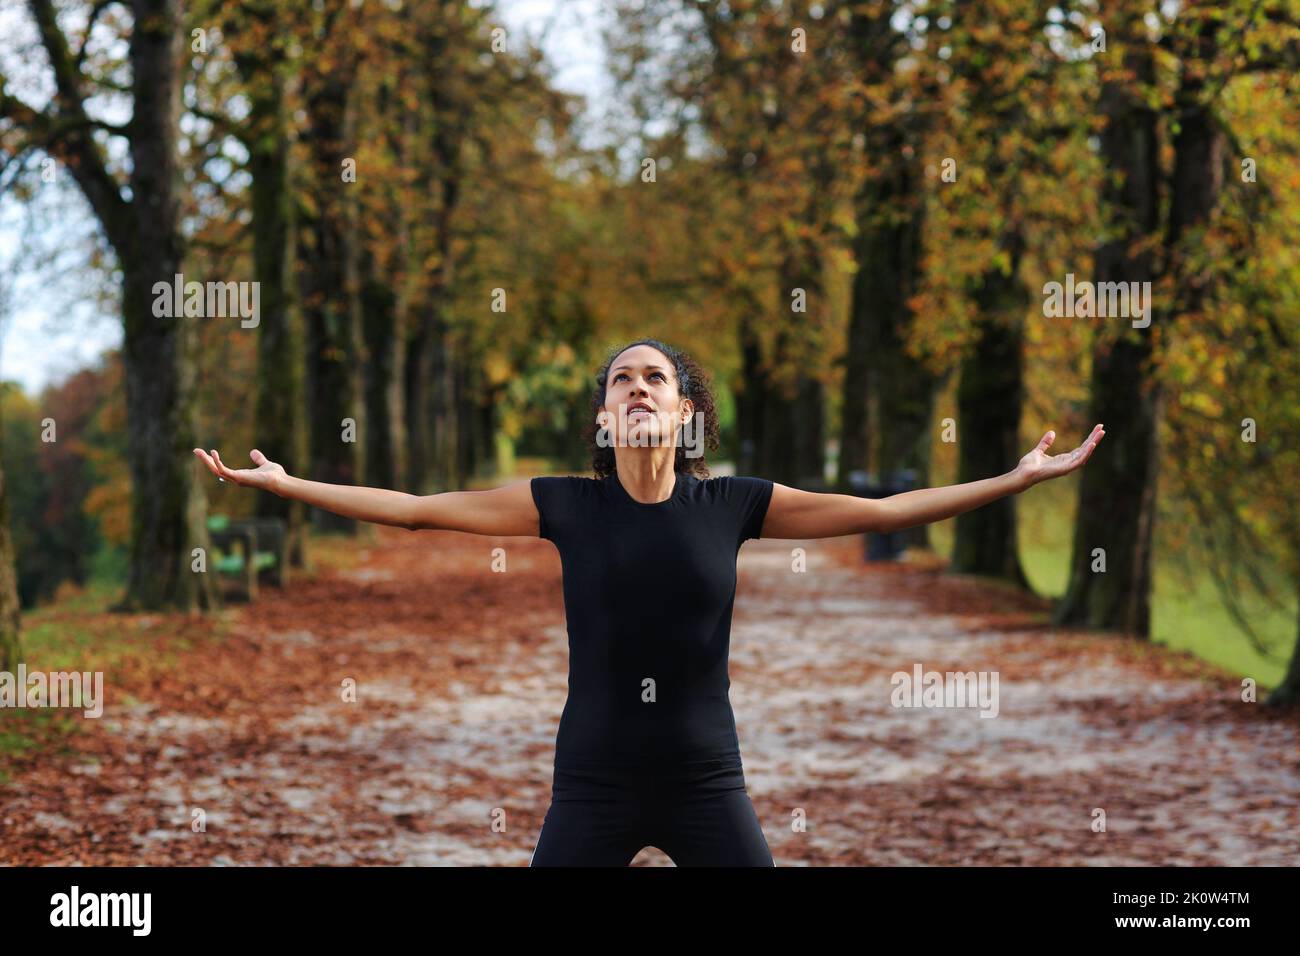 woman outdoors with arms open meditating in sportswear Stock Photo